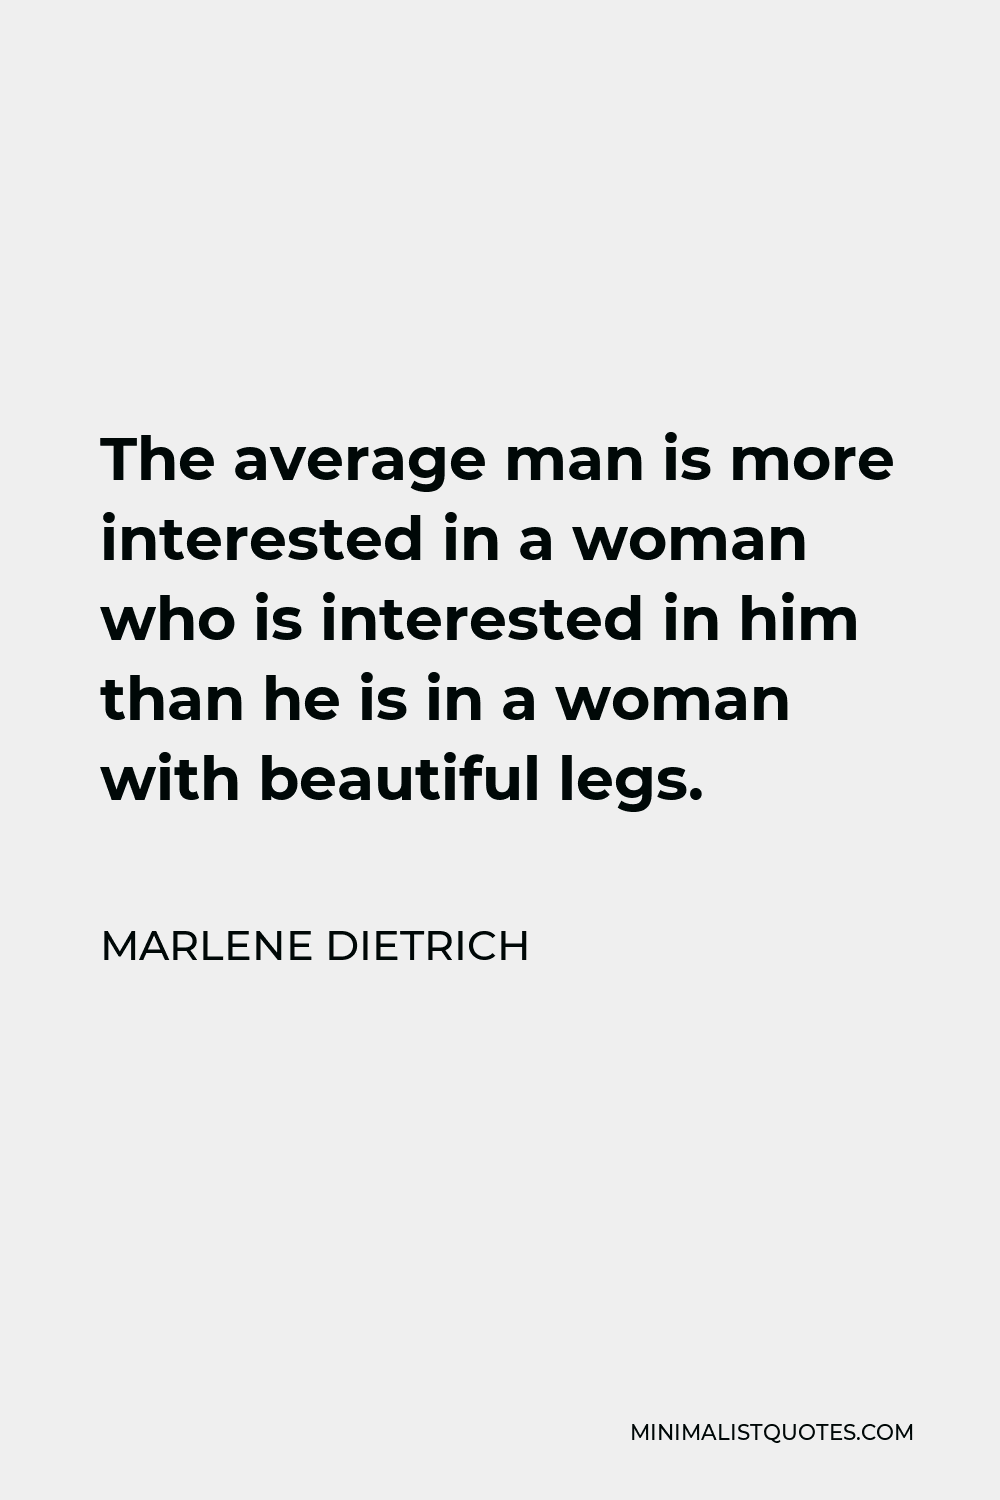 Marlene Dietrich Quote - The average man is more interested in a woman who is interested in him than he is in a woman with beautiful legs.